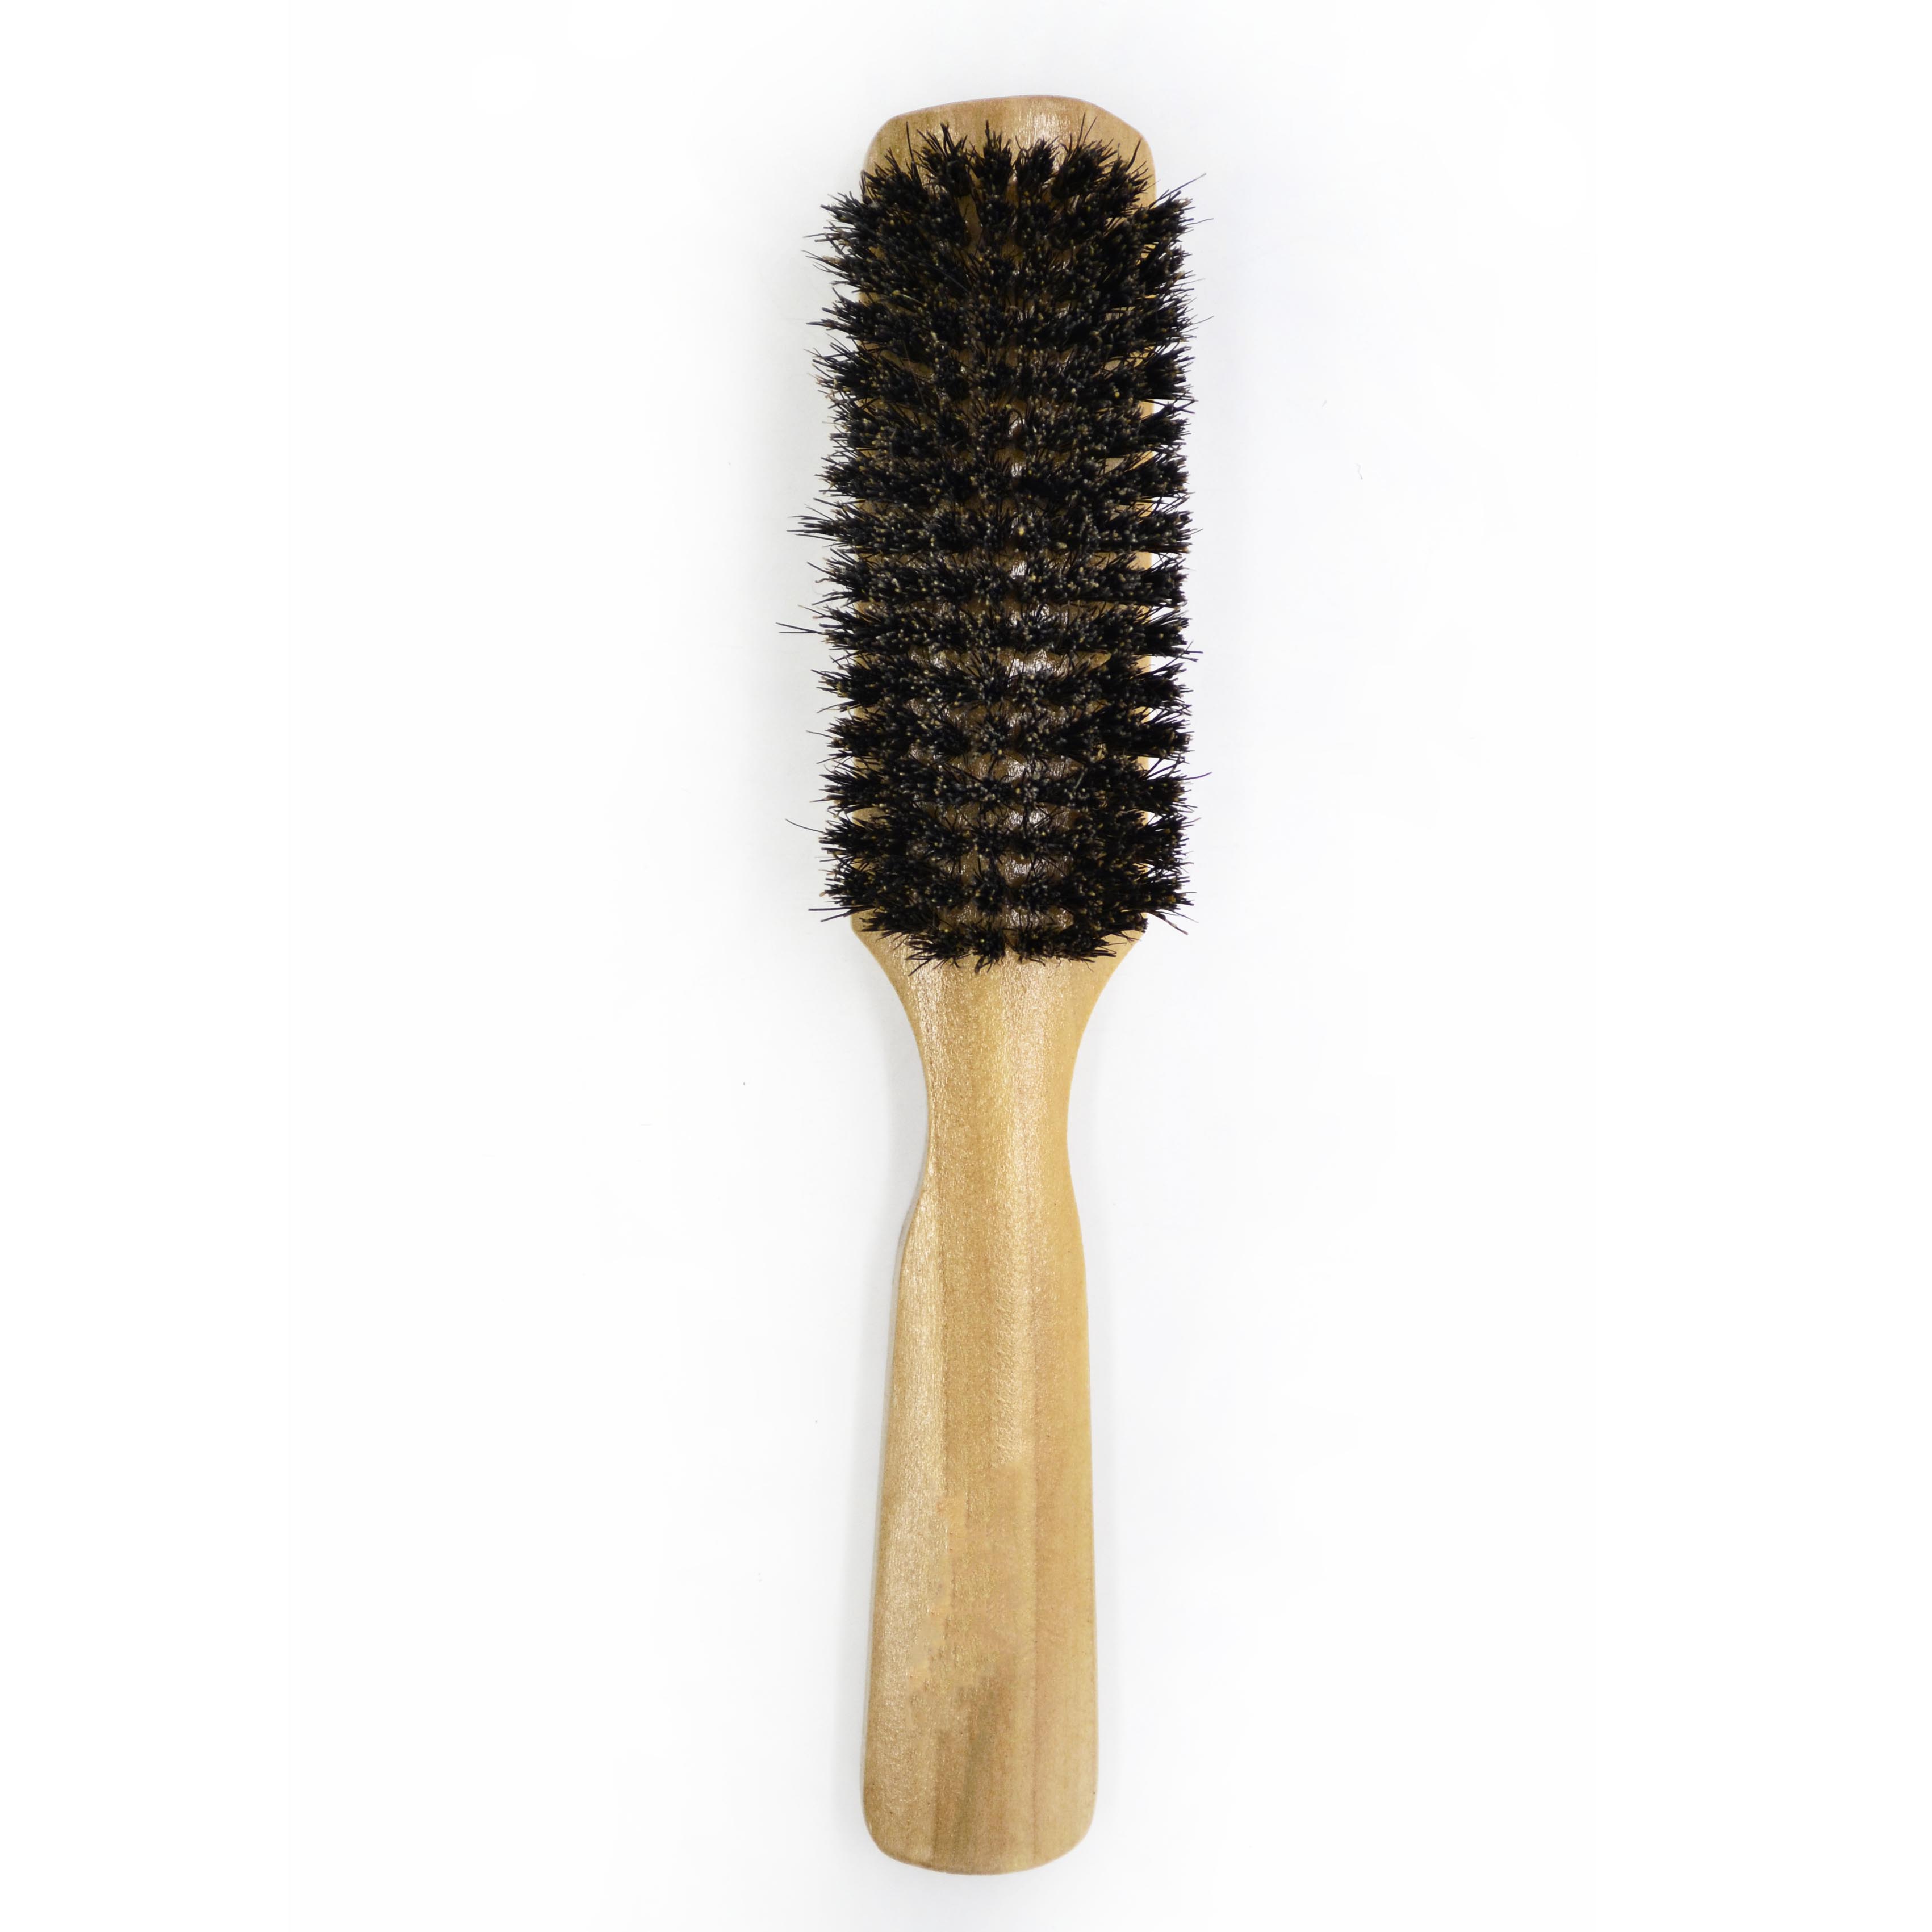 The Classic 100% Boar Bristle Hair Brush, Suitable For Thin To Normal Hair - Naturally Conditions Hair, Improves Texture, Exfoliates, Soothes and Stimulates the Scalp